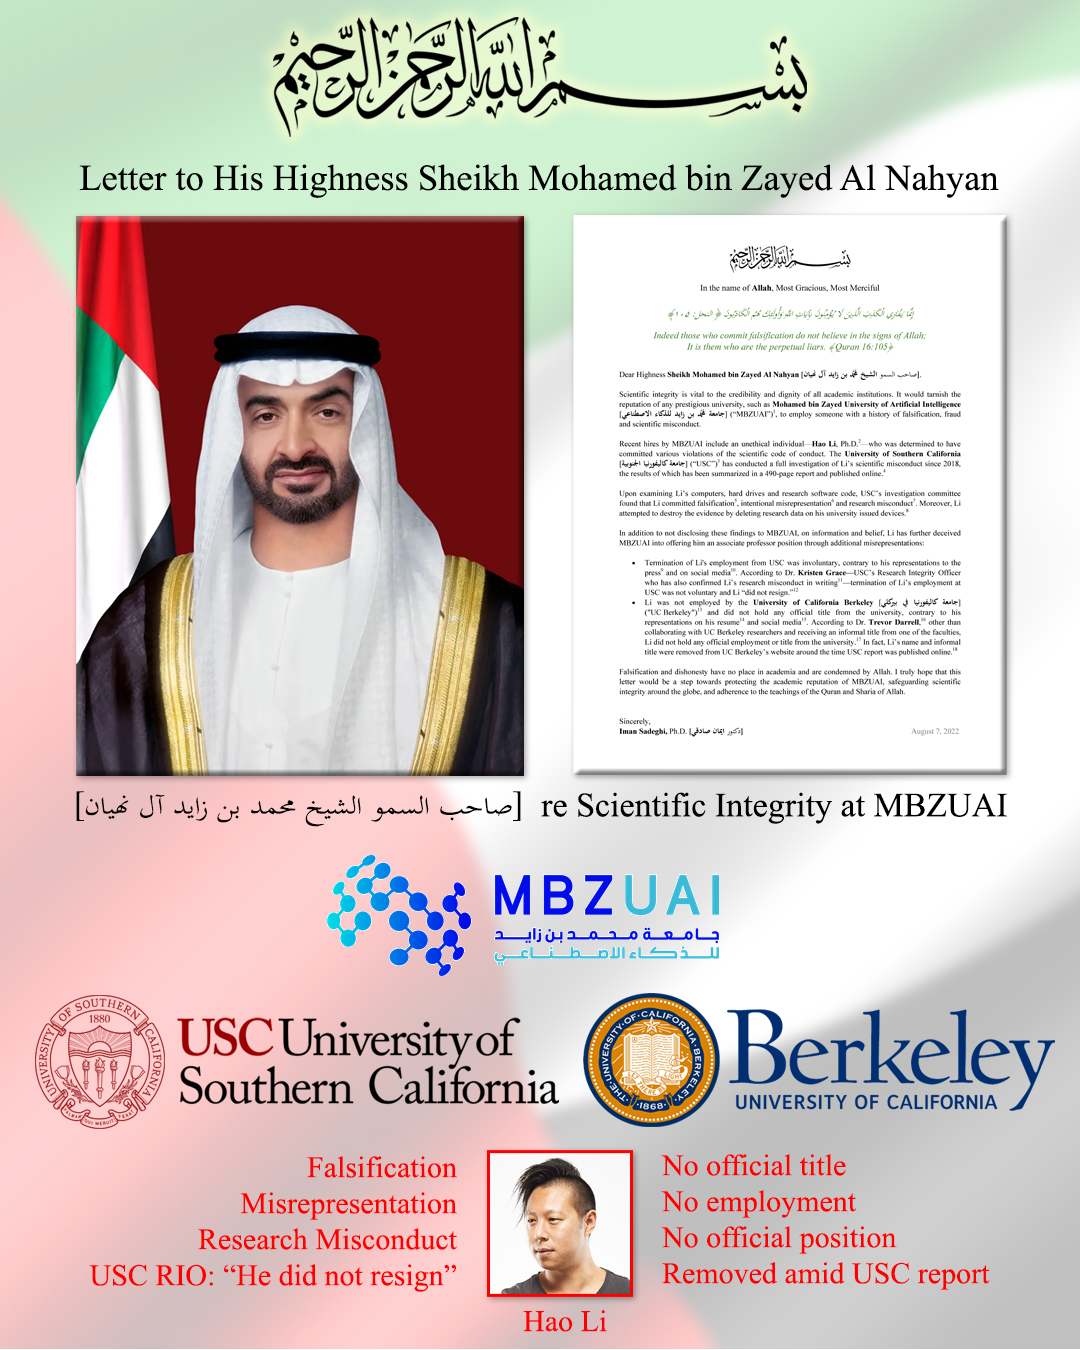 Letter to His Highness Sheikh Mohamed bin Zayed re Scientific Integrity at MBZUAI